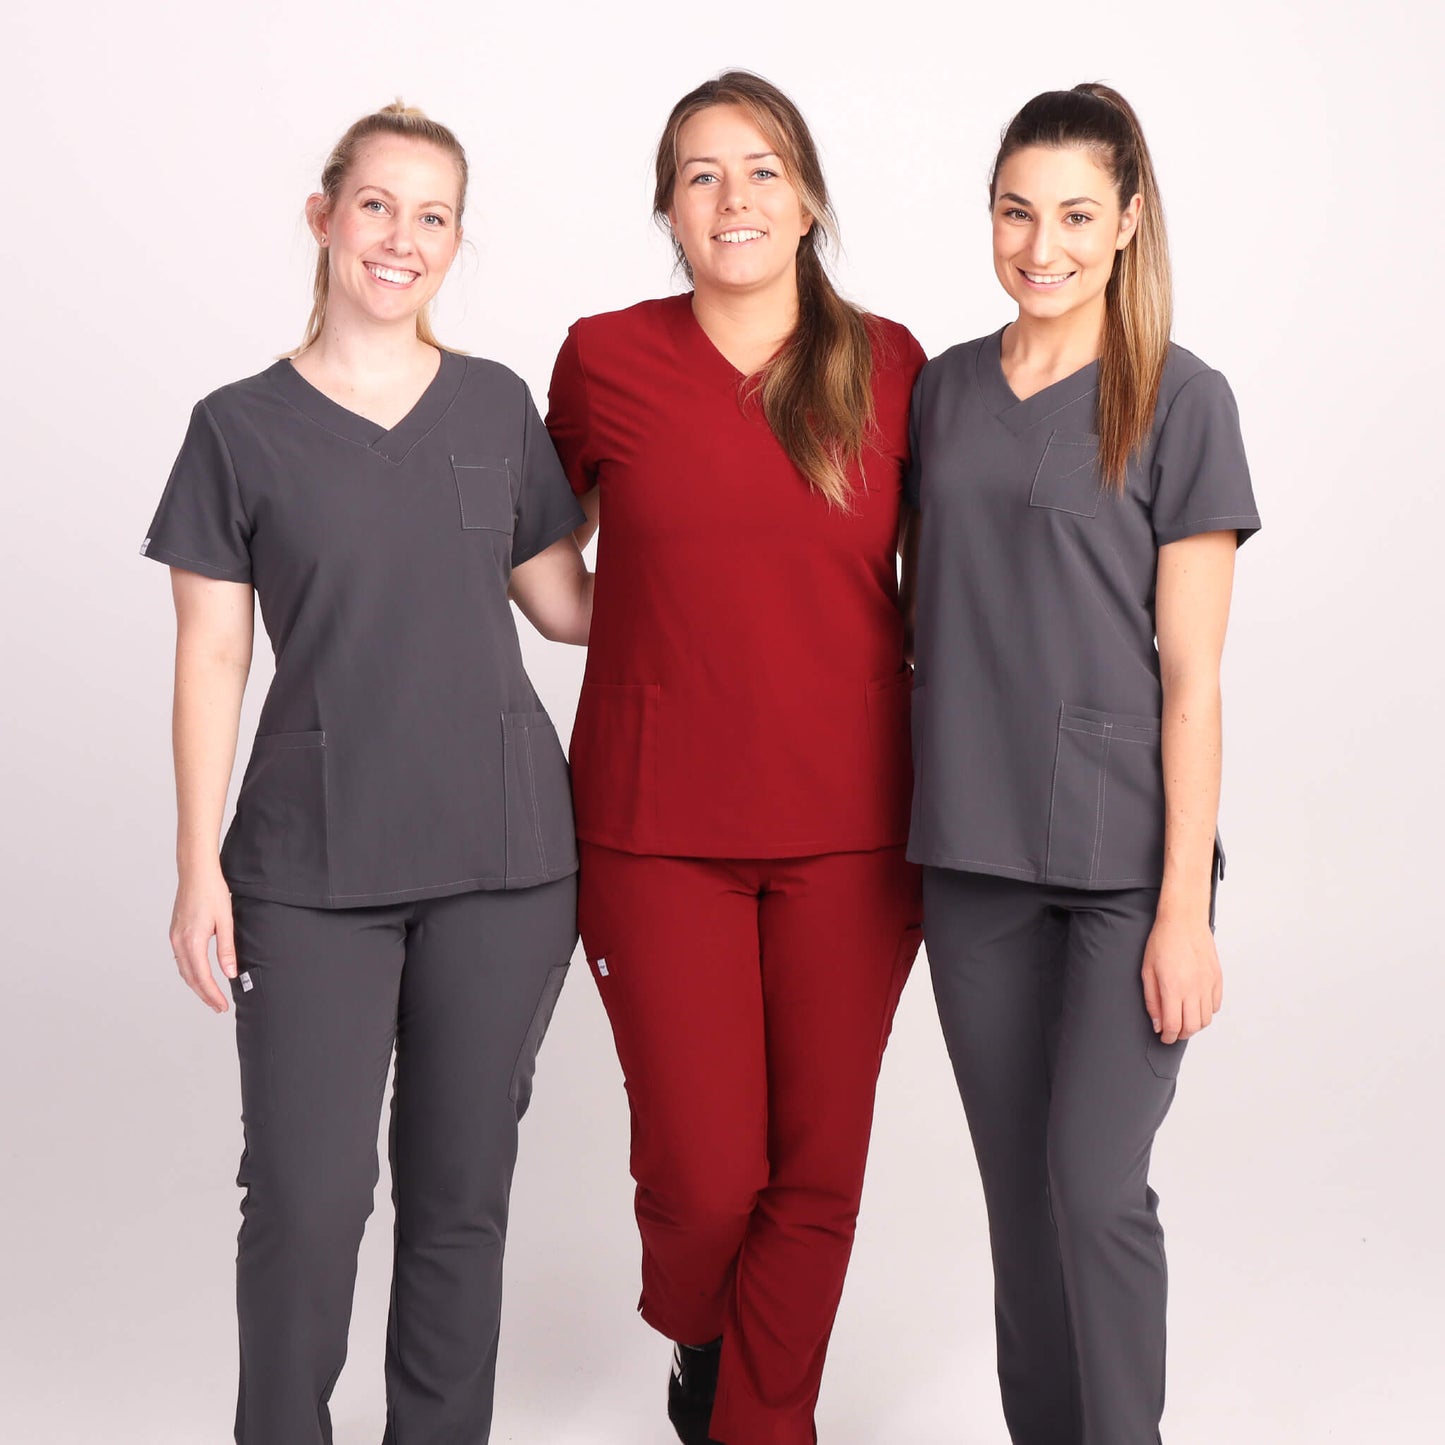 Nurse wearing Charcoal/Grey Medical Scrub Set by Fit Right Medical Scrubs. Available online near you today.